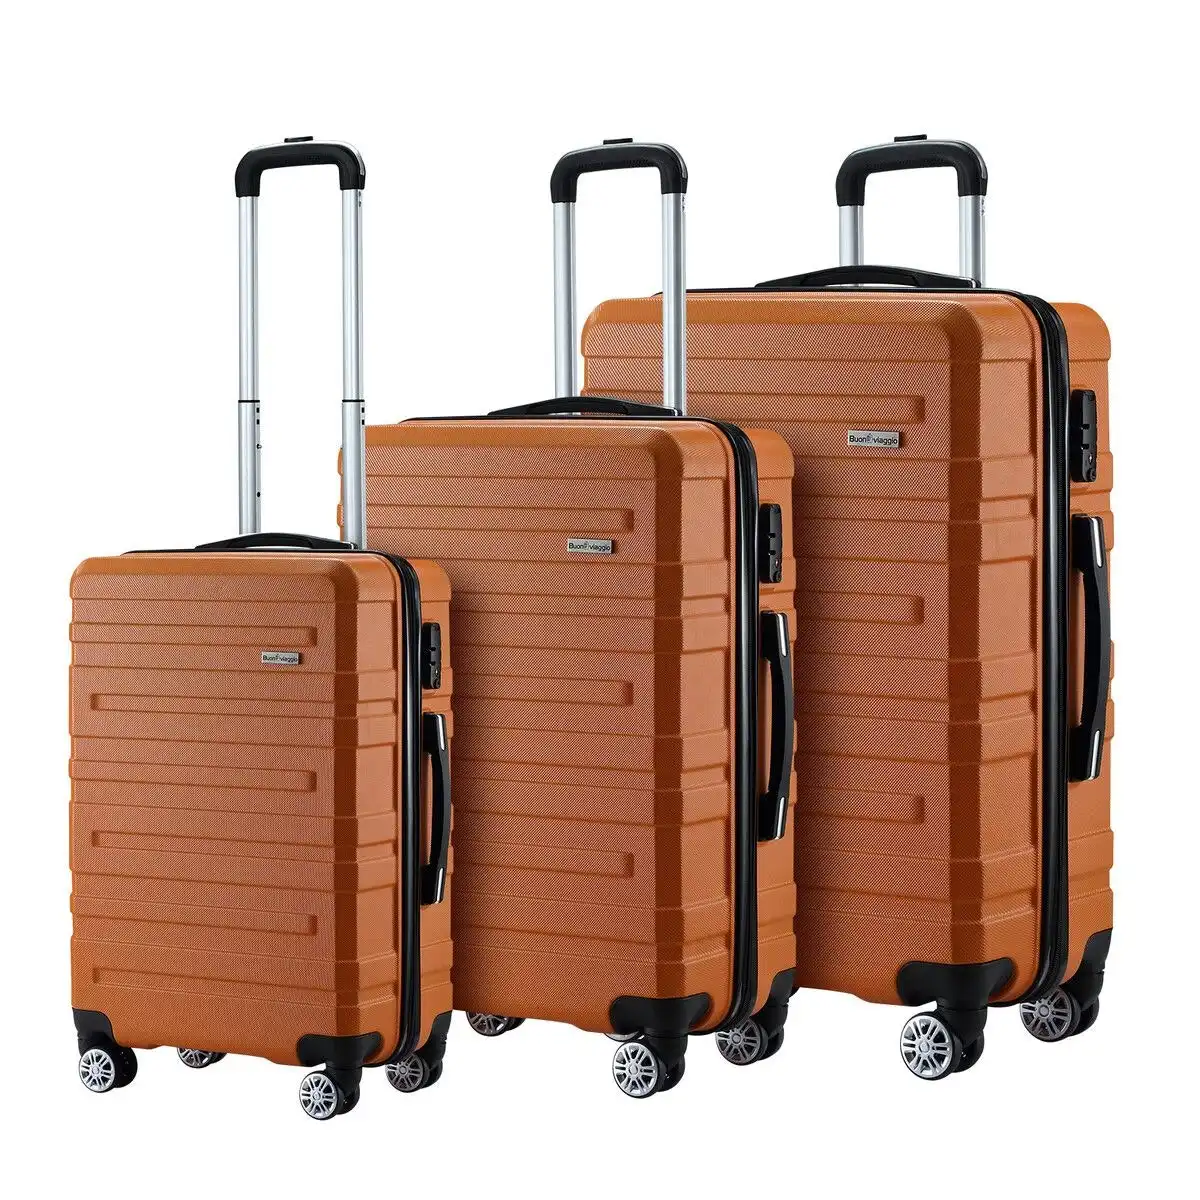 Buon Viaggio 3 Piece Luggage Travel Set Hard Carry On Suitcases Lightweight Trolley with 2 Covers and TSA Lock Orange